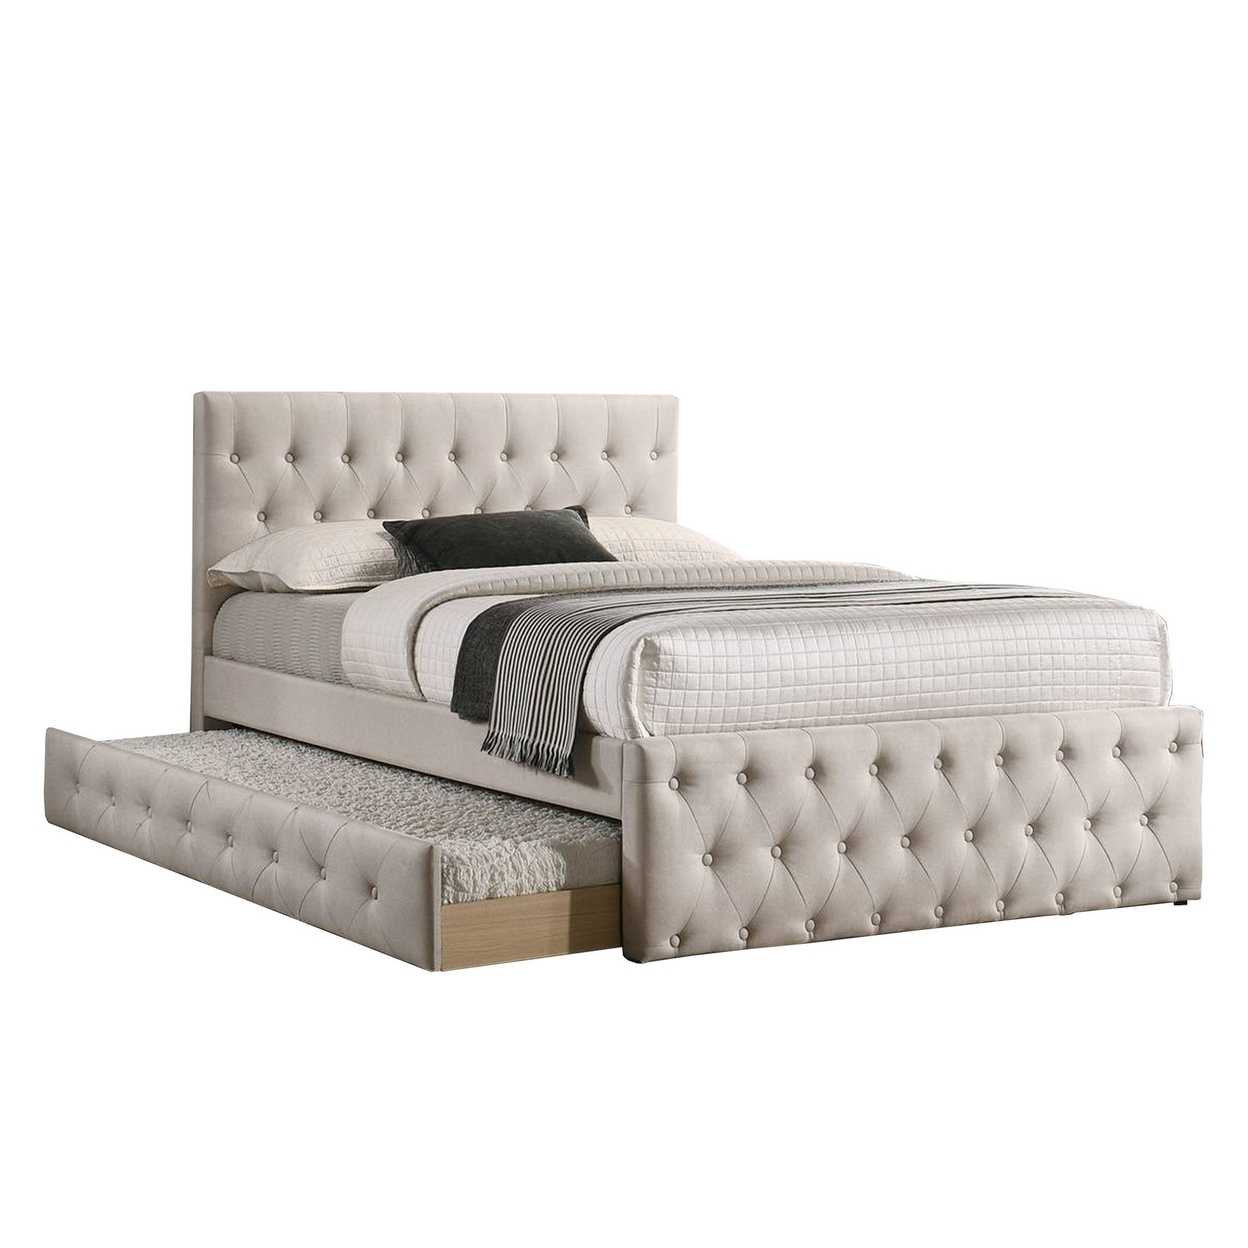 Nek Wood Twin Size Upholstered Bed With Trundle, Tufted, Taupe Burlap Frame- Saltoro Sherpi